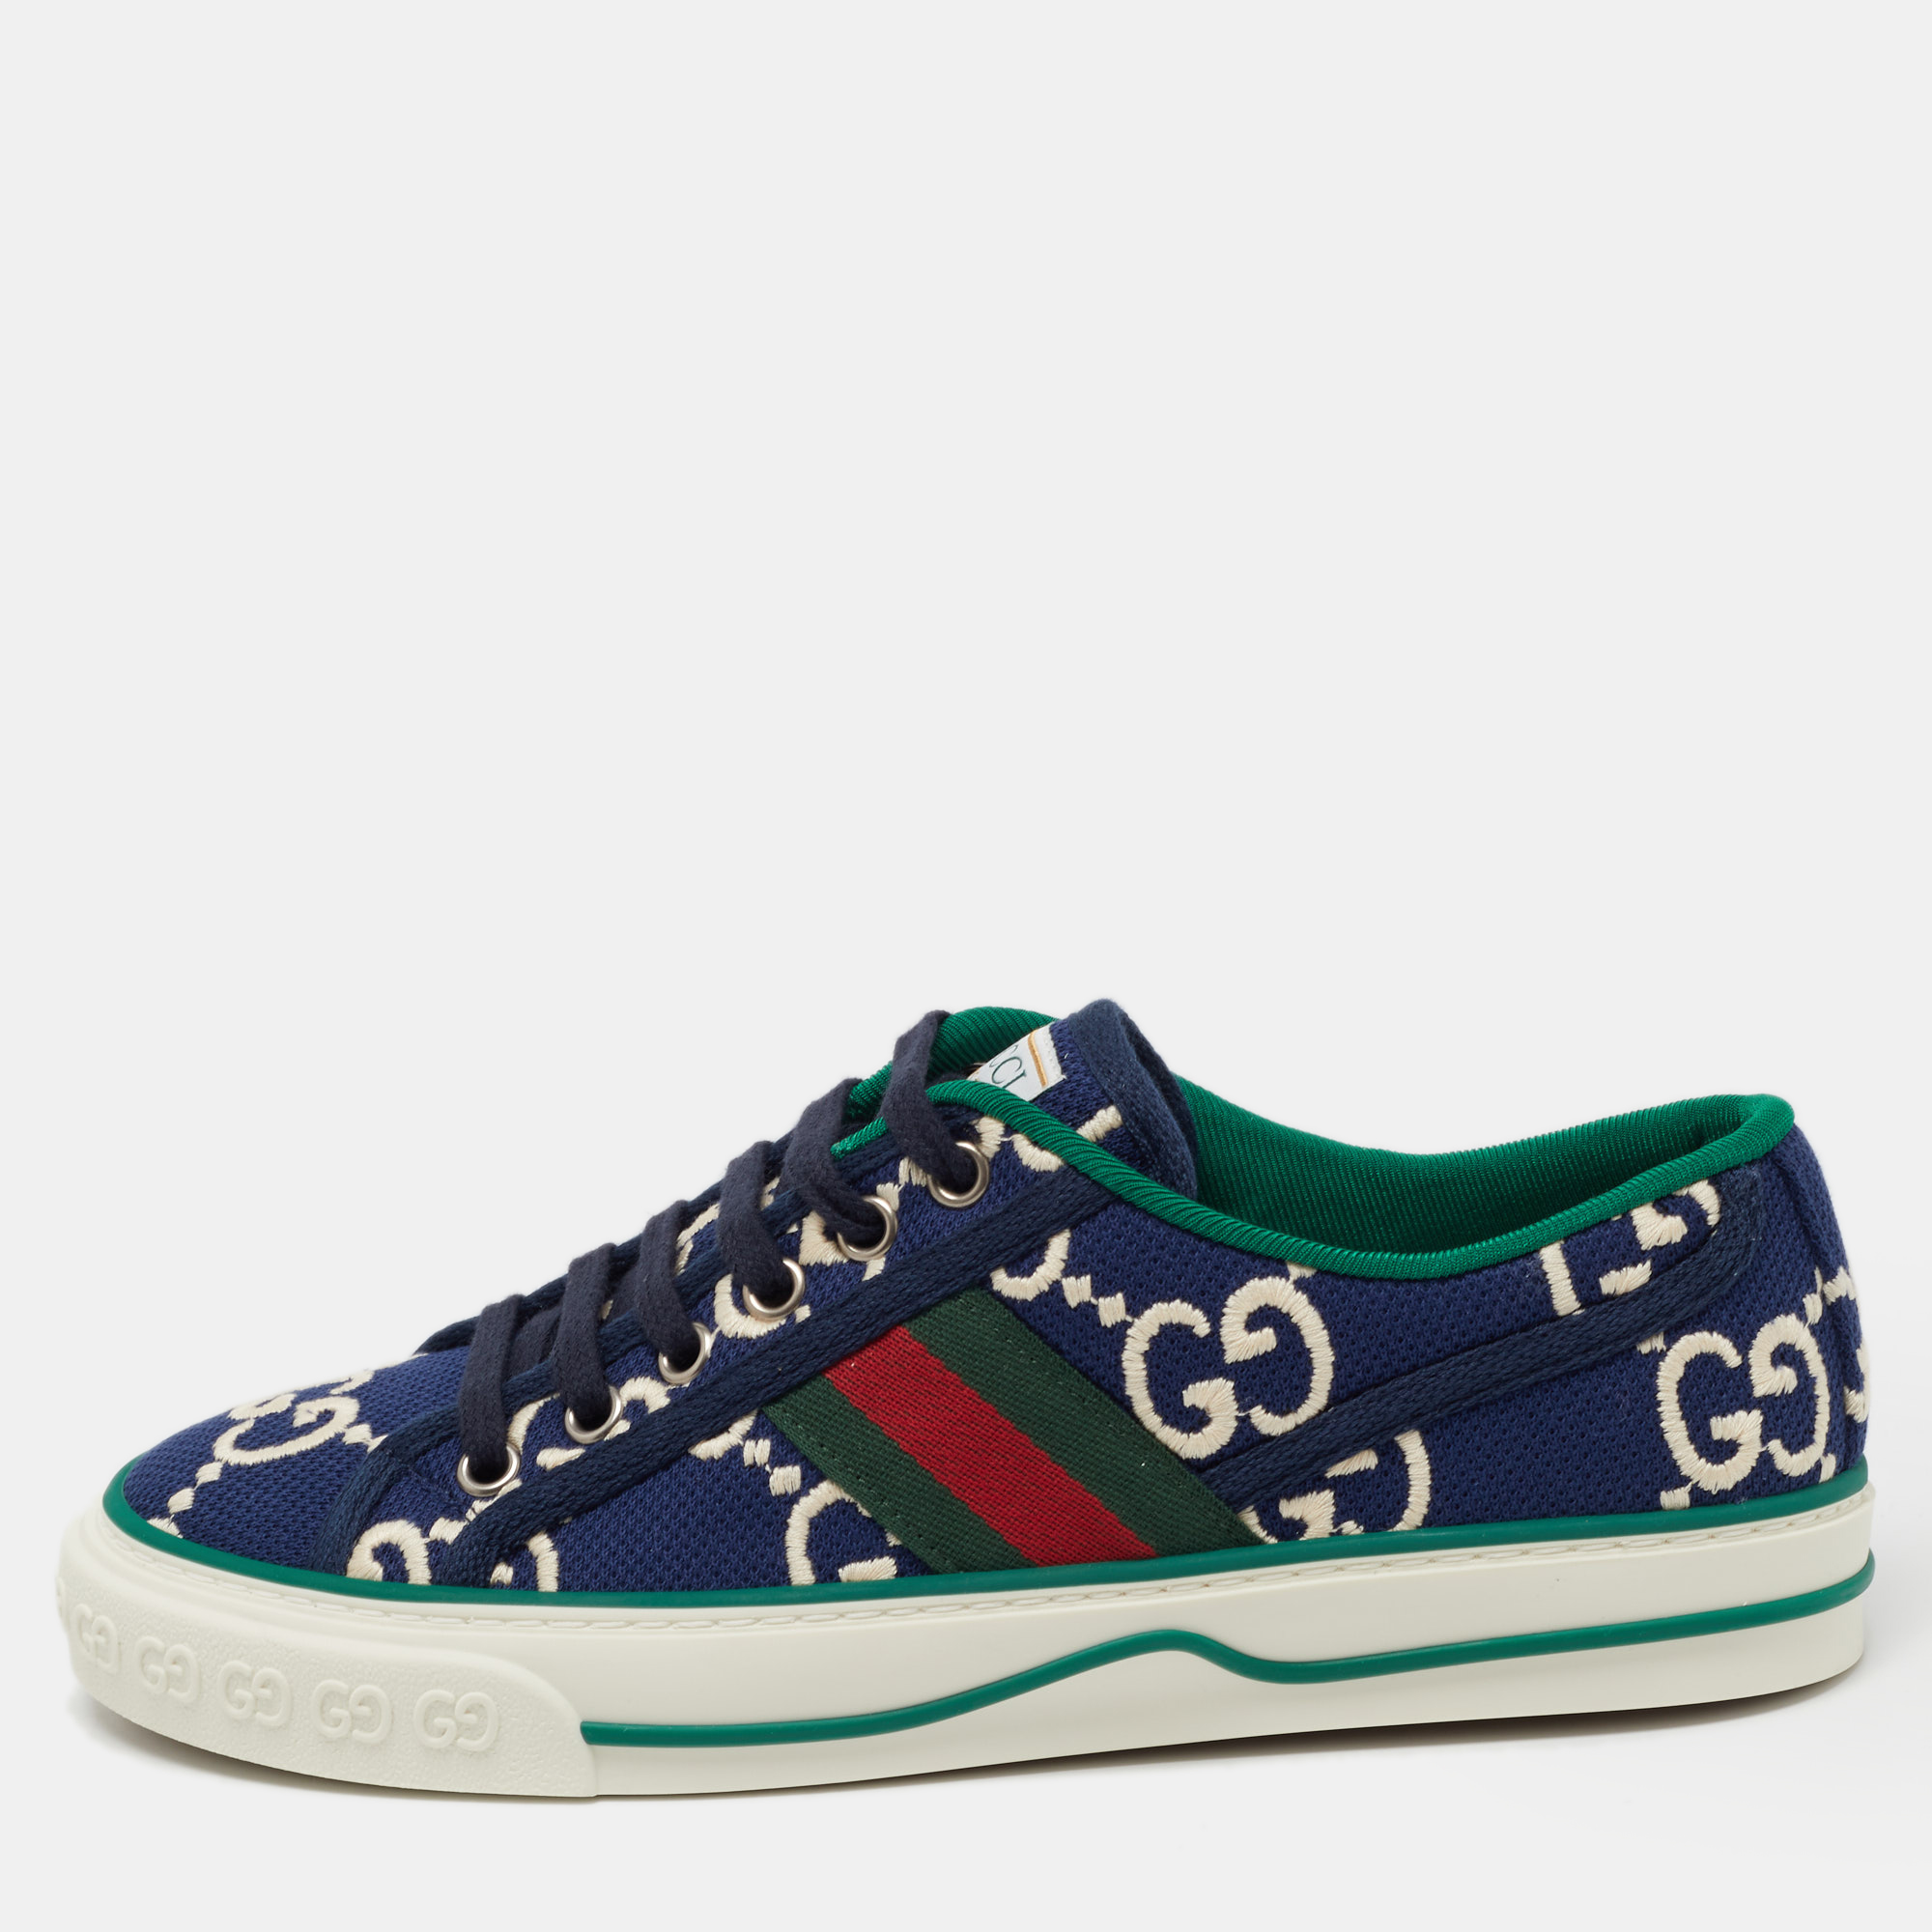 Pre-owned Gucci Navy Blue Denim Tennis 1977 Sneakers Size 36